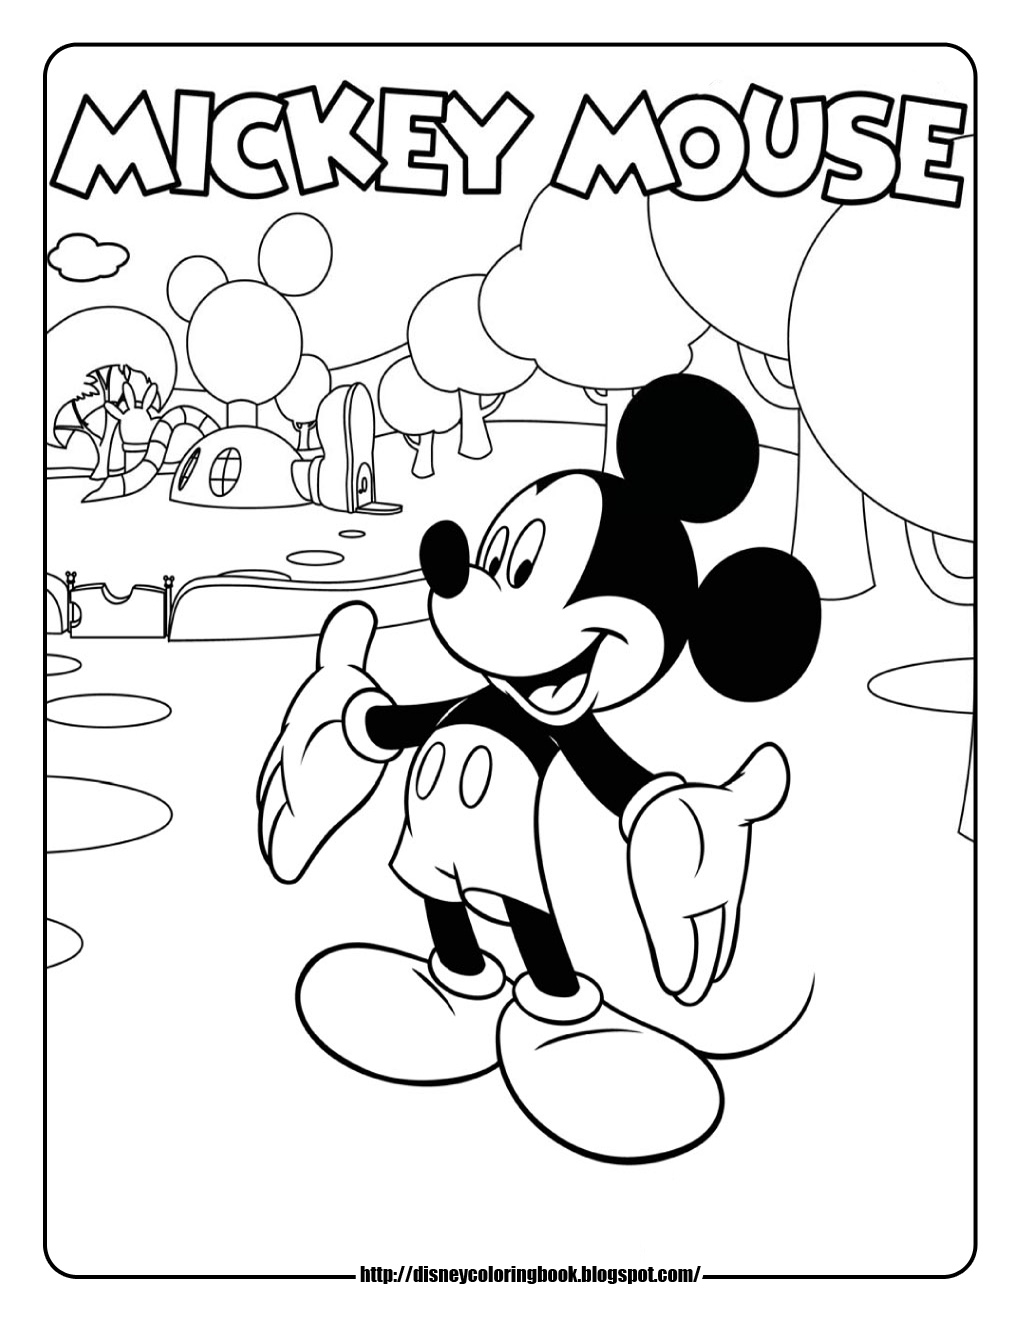 Mickey Mouse Clubhouse 1: Free Disney Coloring Sheets | Fantasy